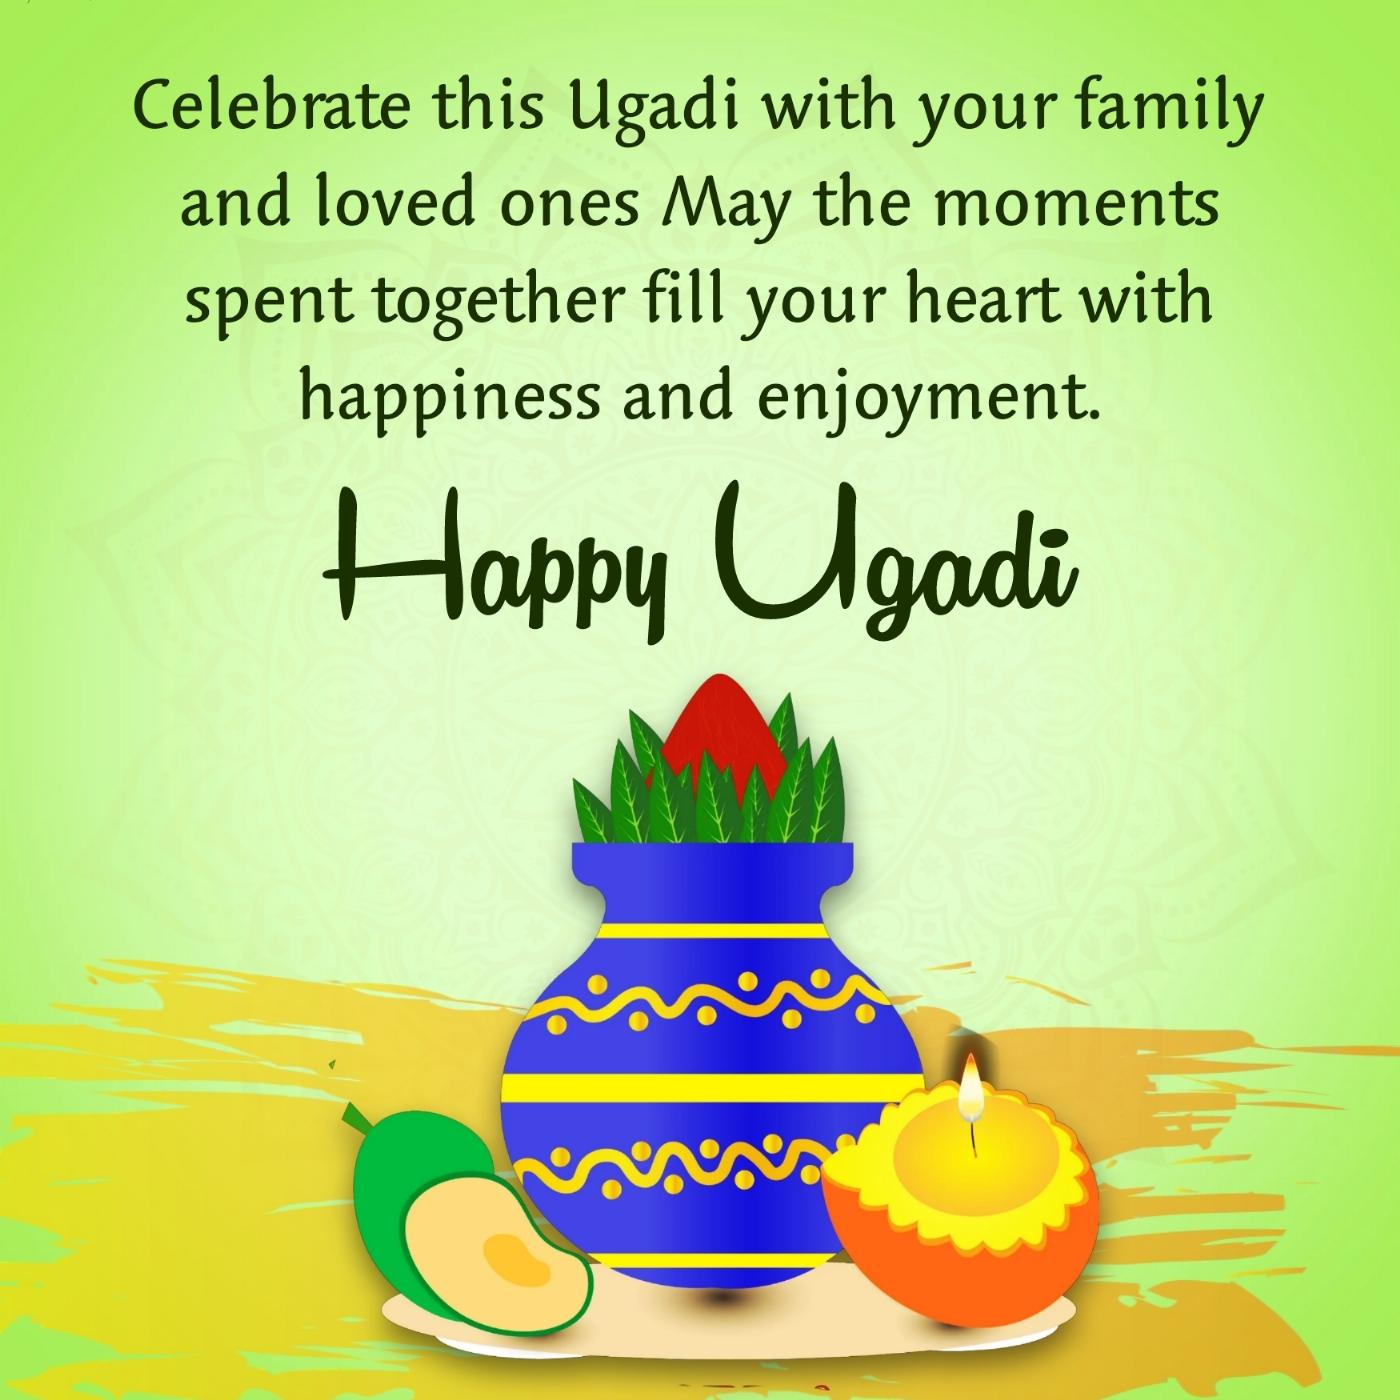 Celebrate this Ugadi with your family and loved ones